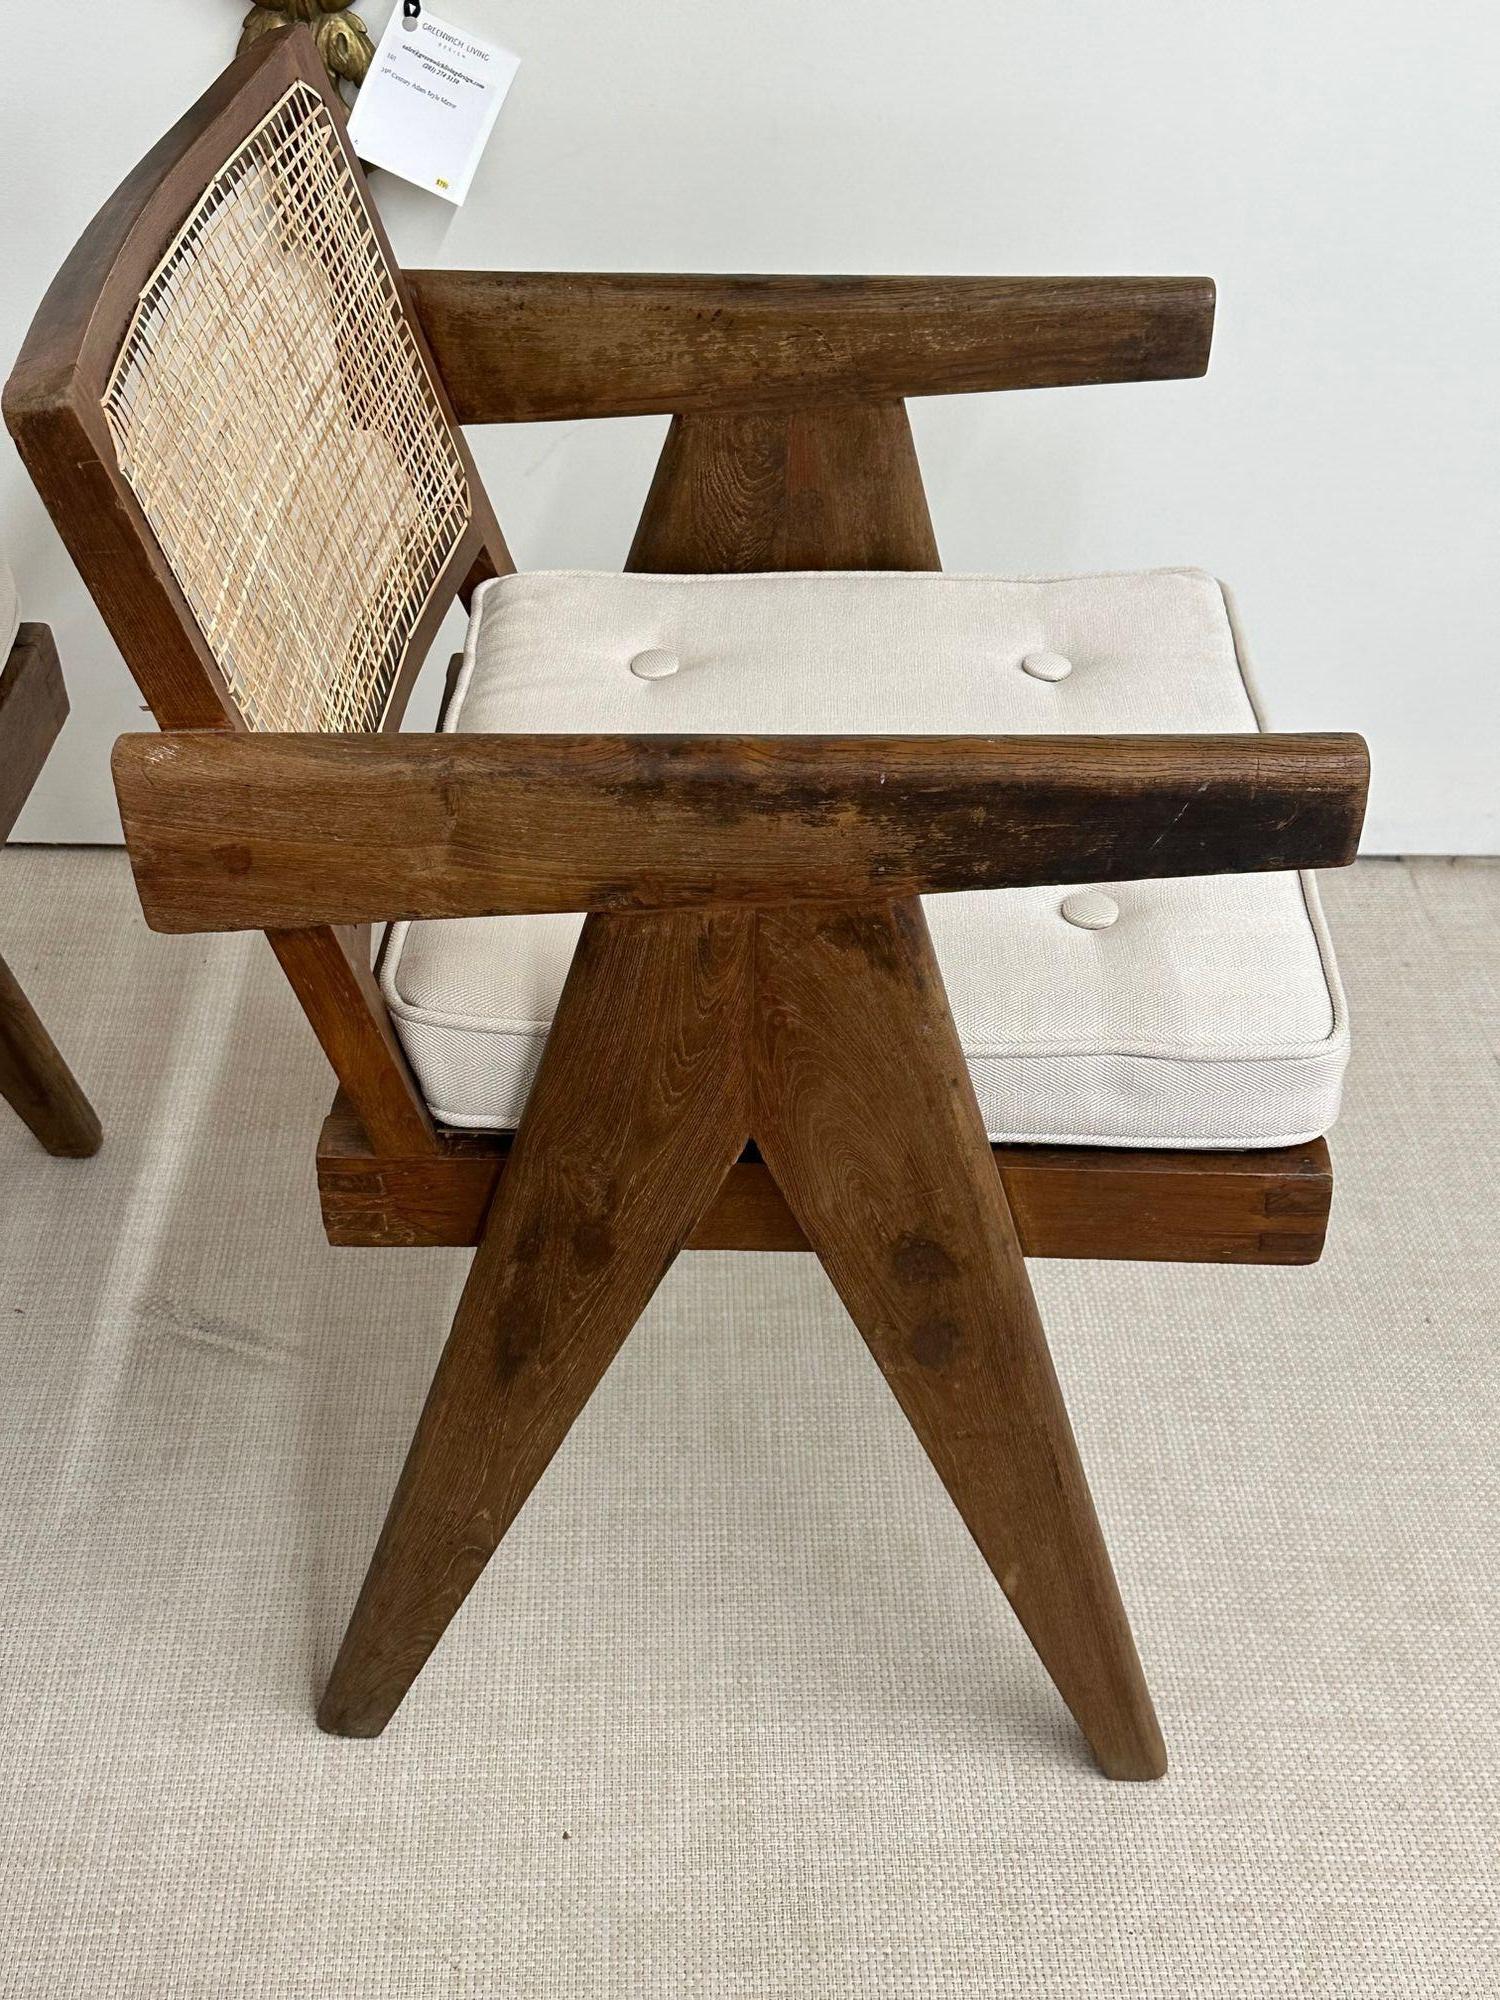 Pierre Jeanneret, Mid-Century Modern, Dining Chairs, Teak, Cane, India, 1960s 2